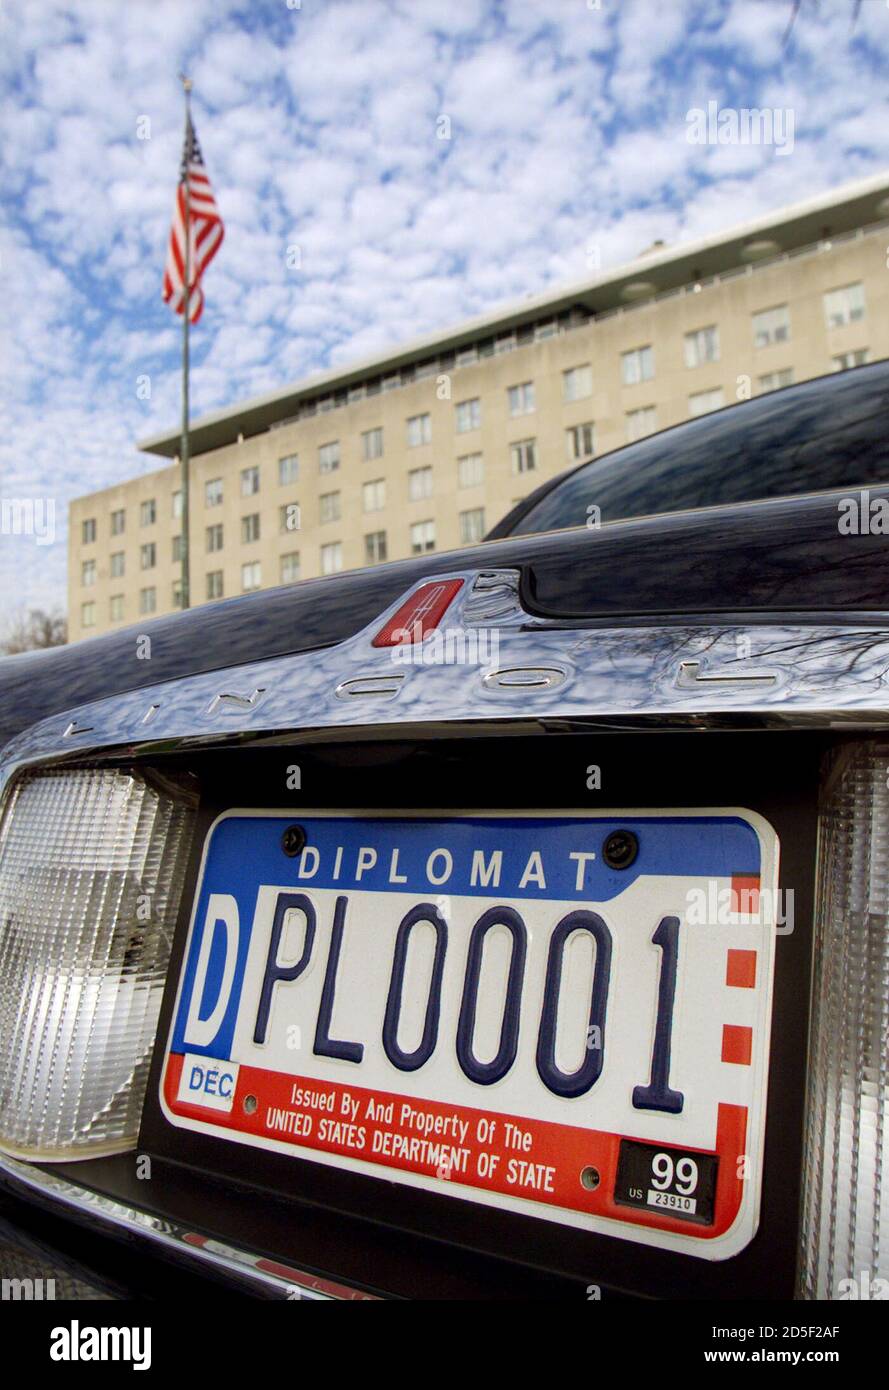 Diplomatic Number License Plate U.S Framed Print Picture Poster Car Art 